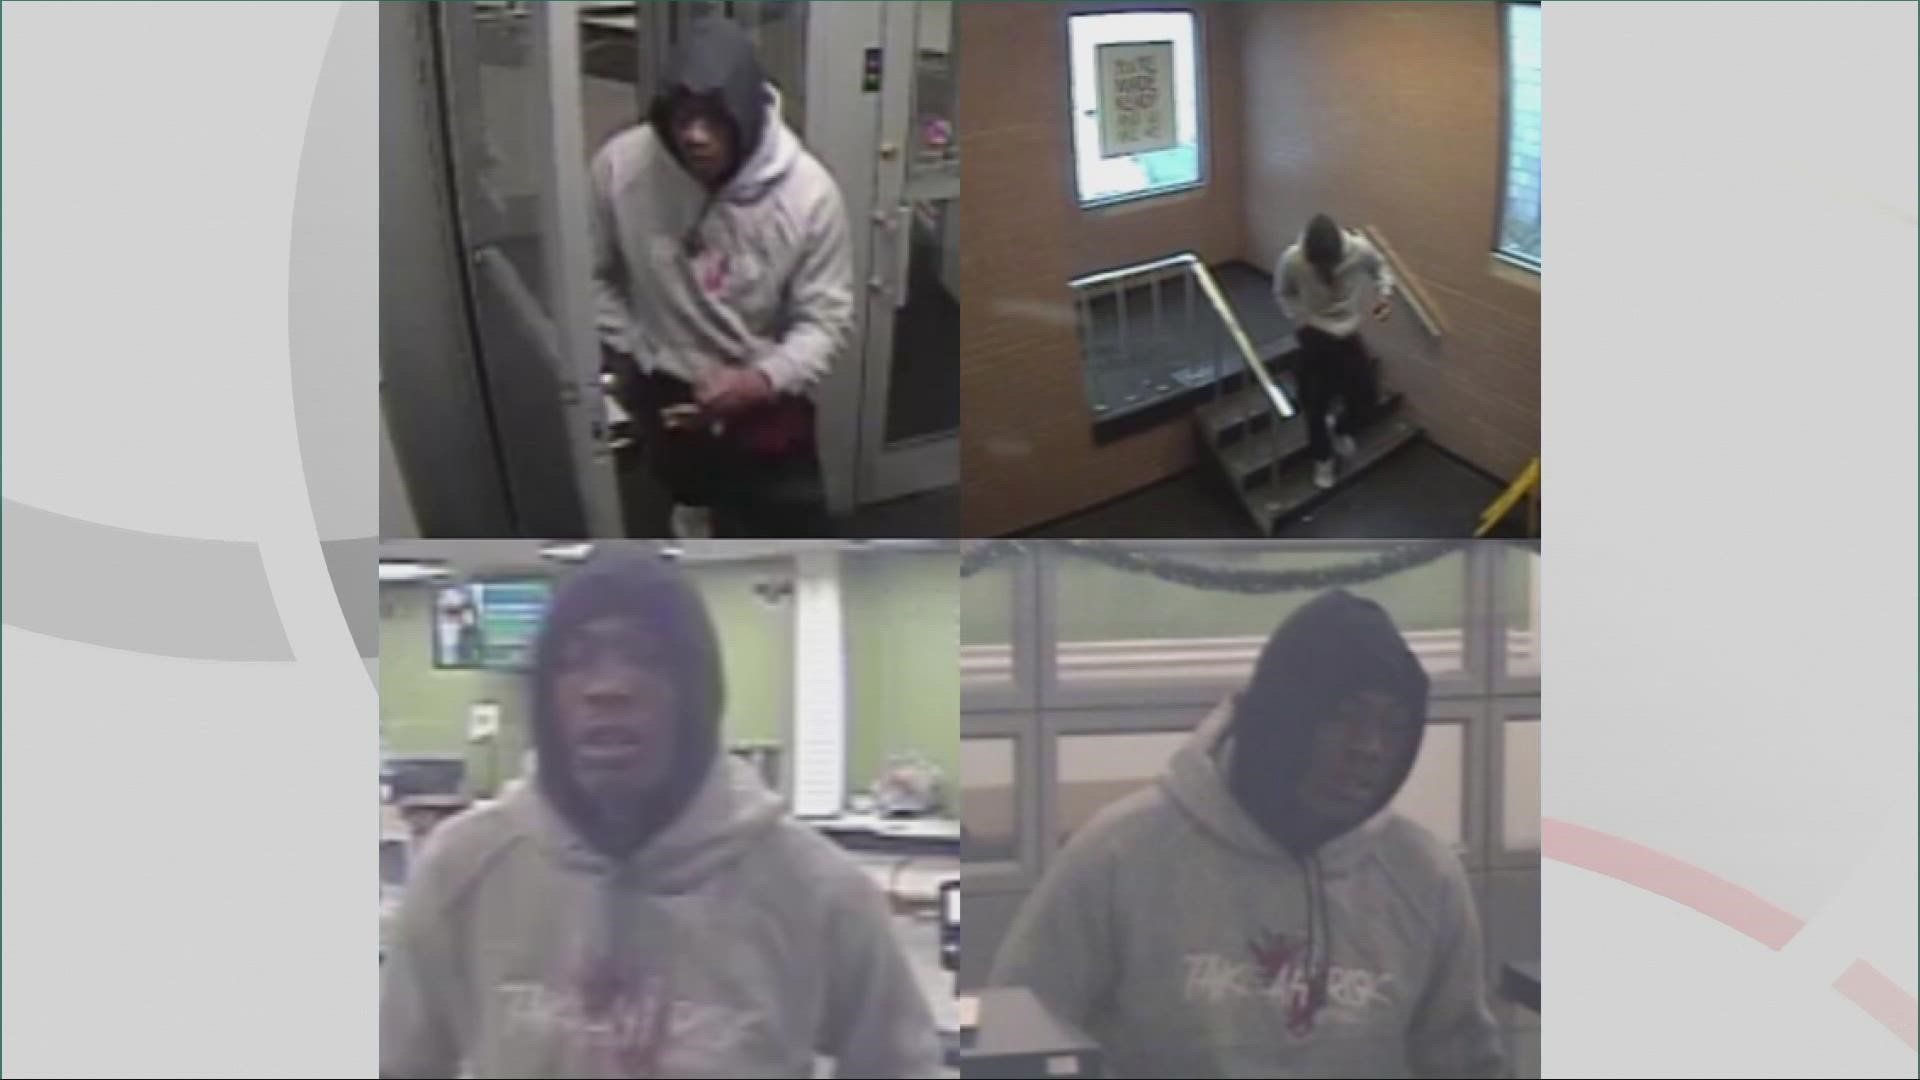 Citizens Bank in Cleveland was robbed on Friday. The FBI is searching for the suspect.